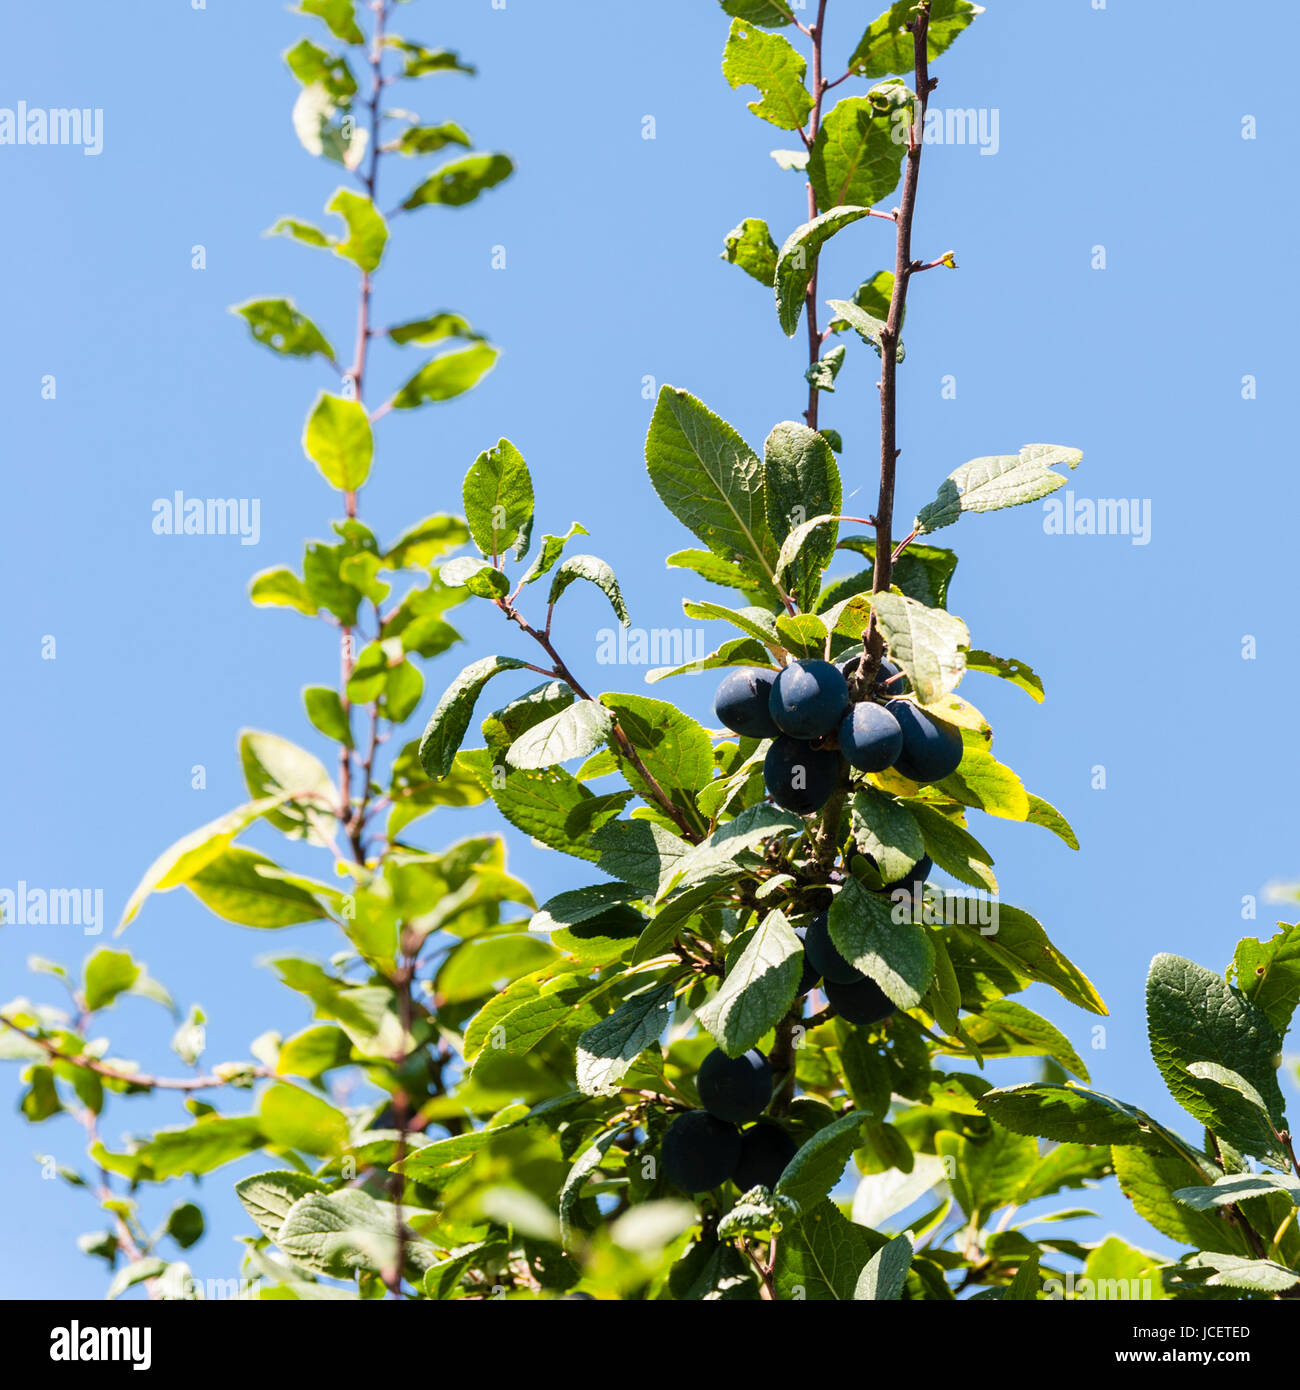 Ripe Damson plums on a tree in the Uk Stock Photo